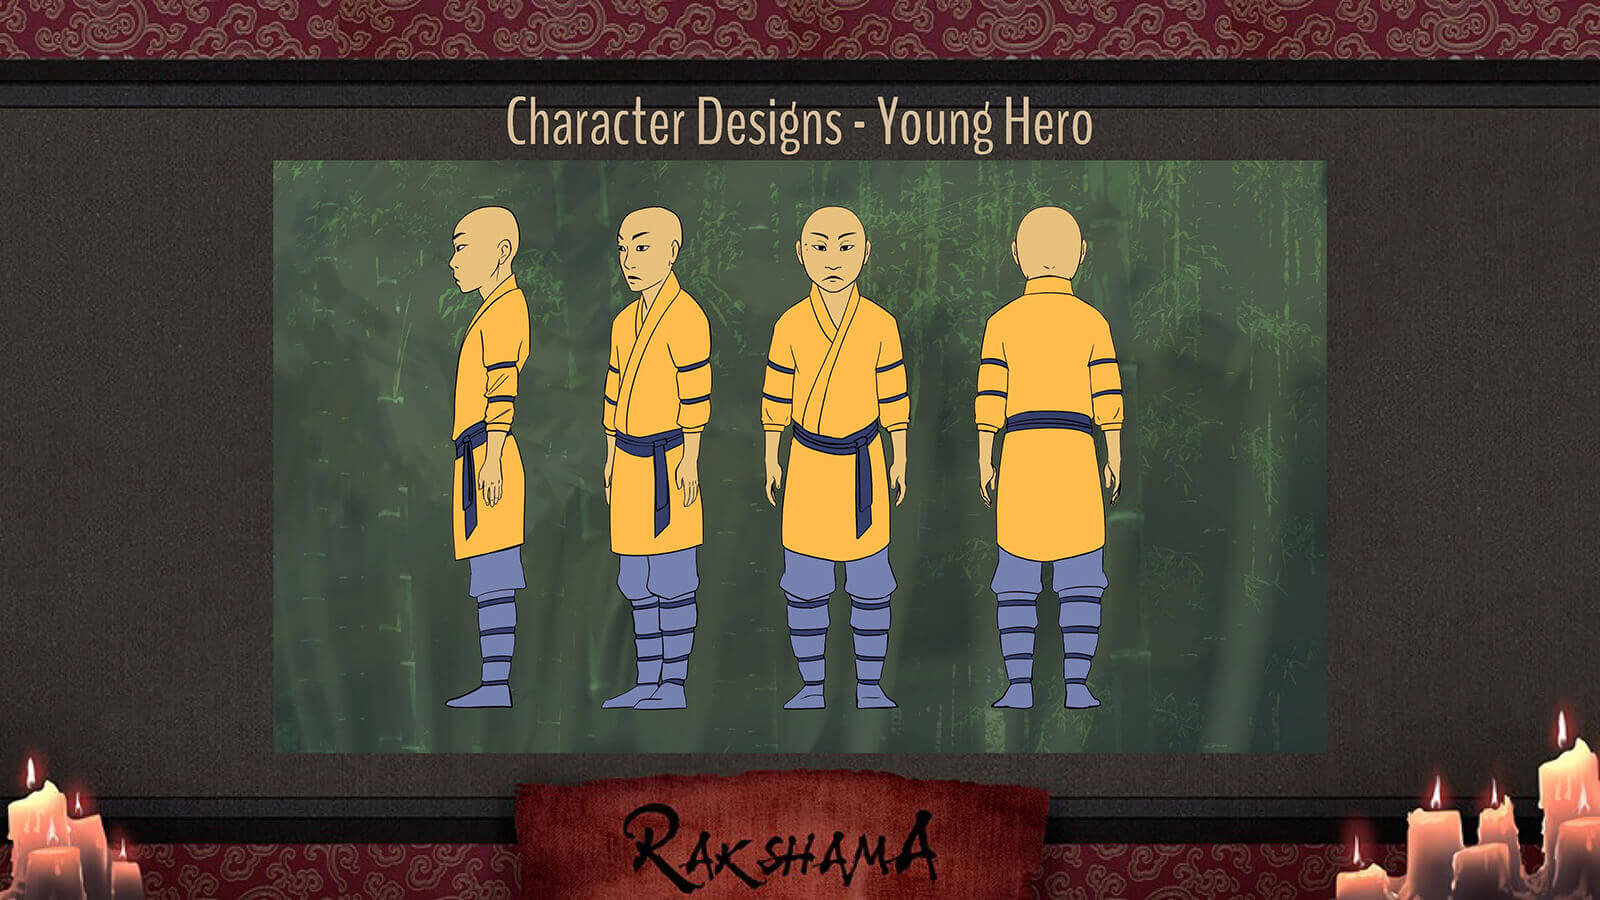 Character Design slide for the film Rakshama, depicting the Young Hero character, a warrior in a yellow and blue clothing